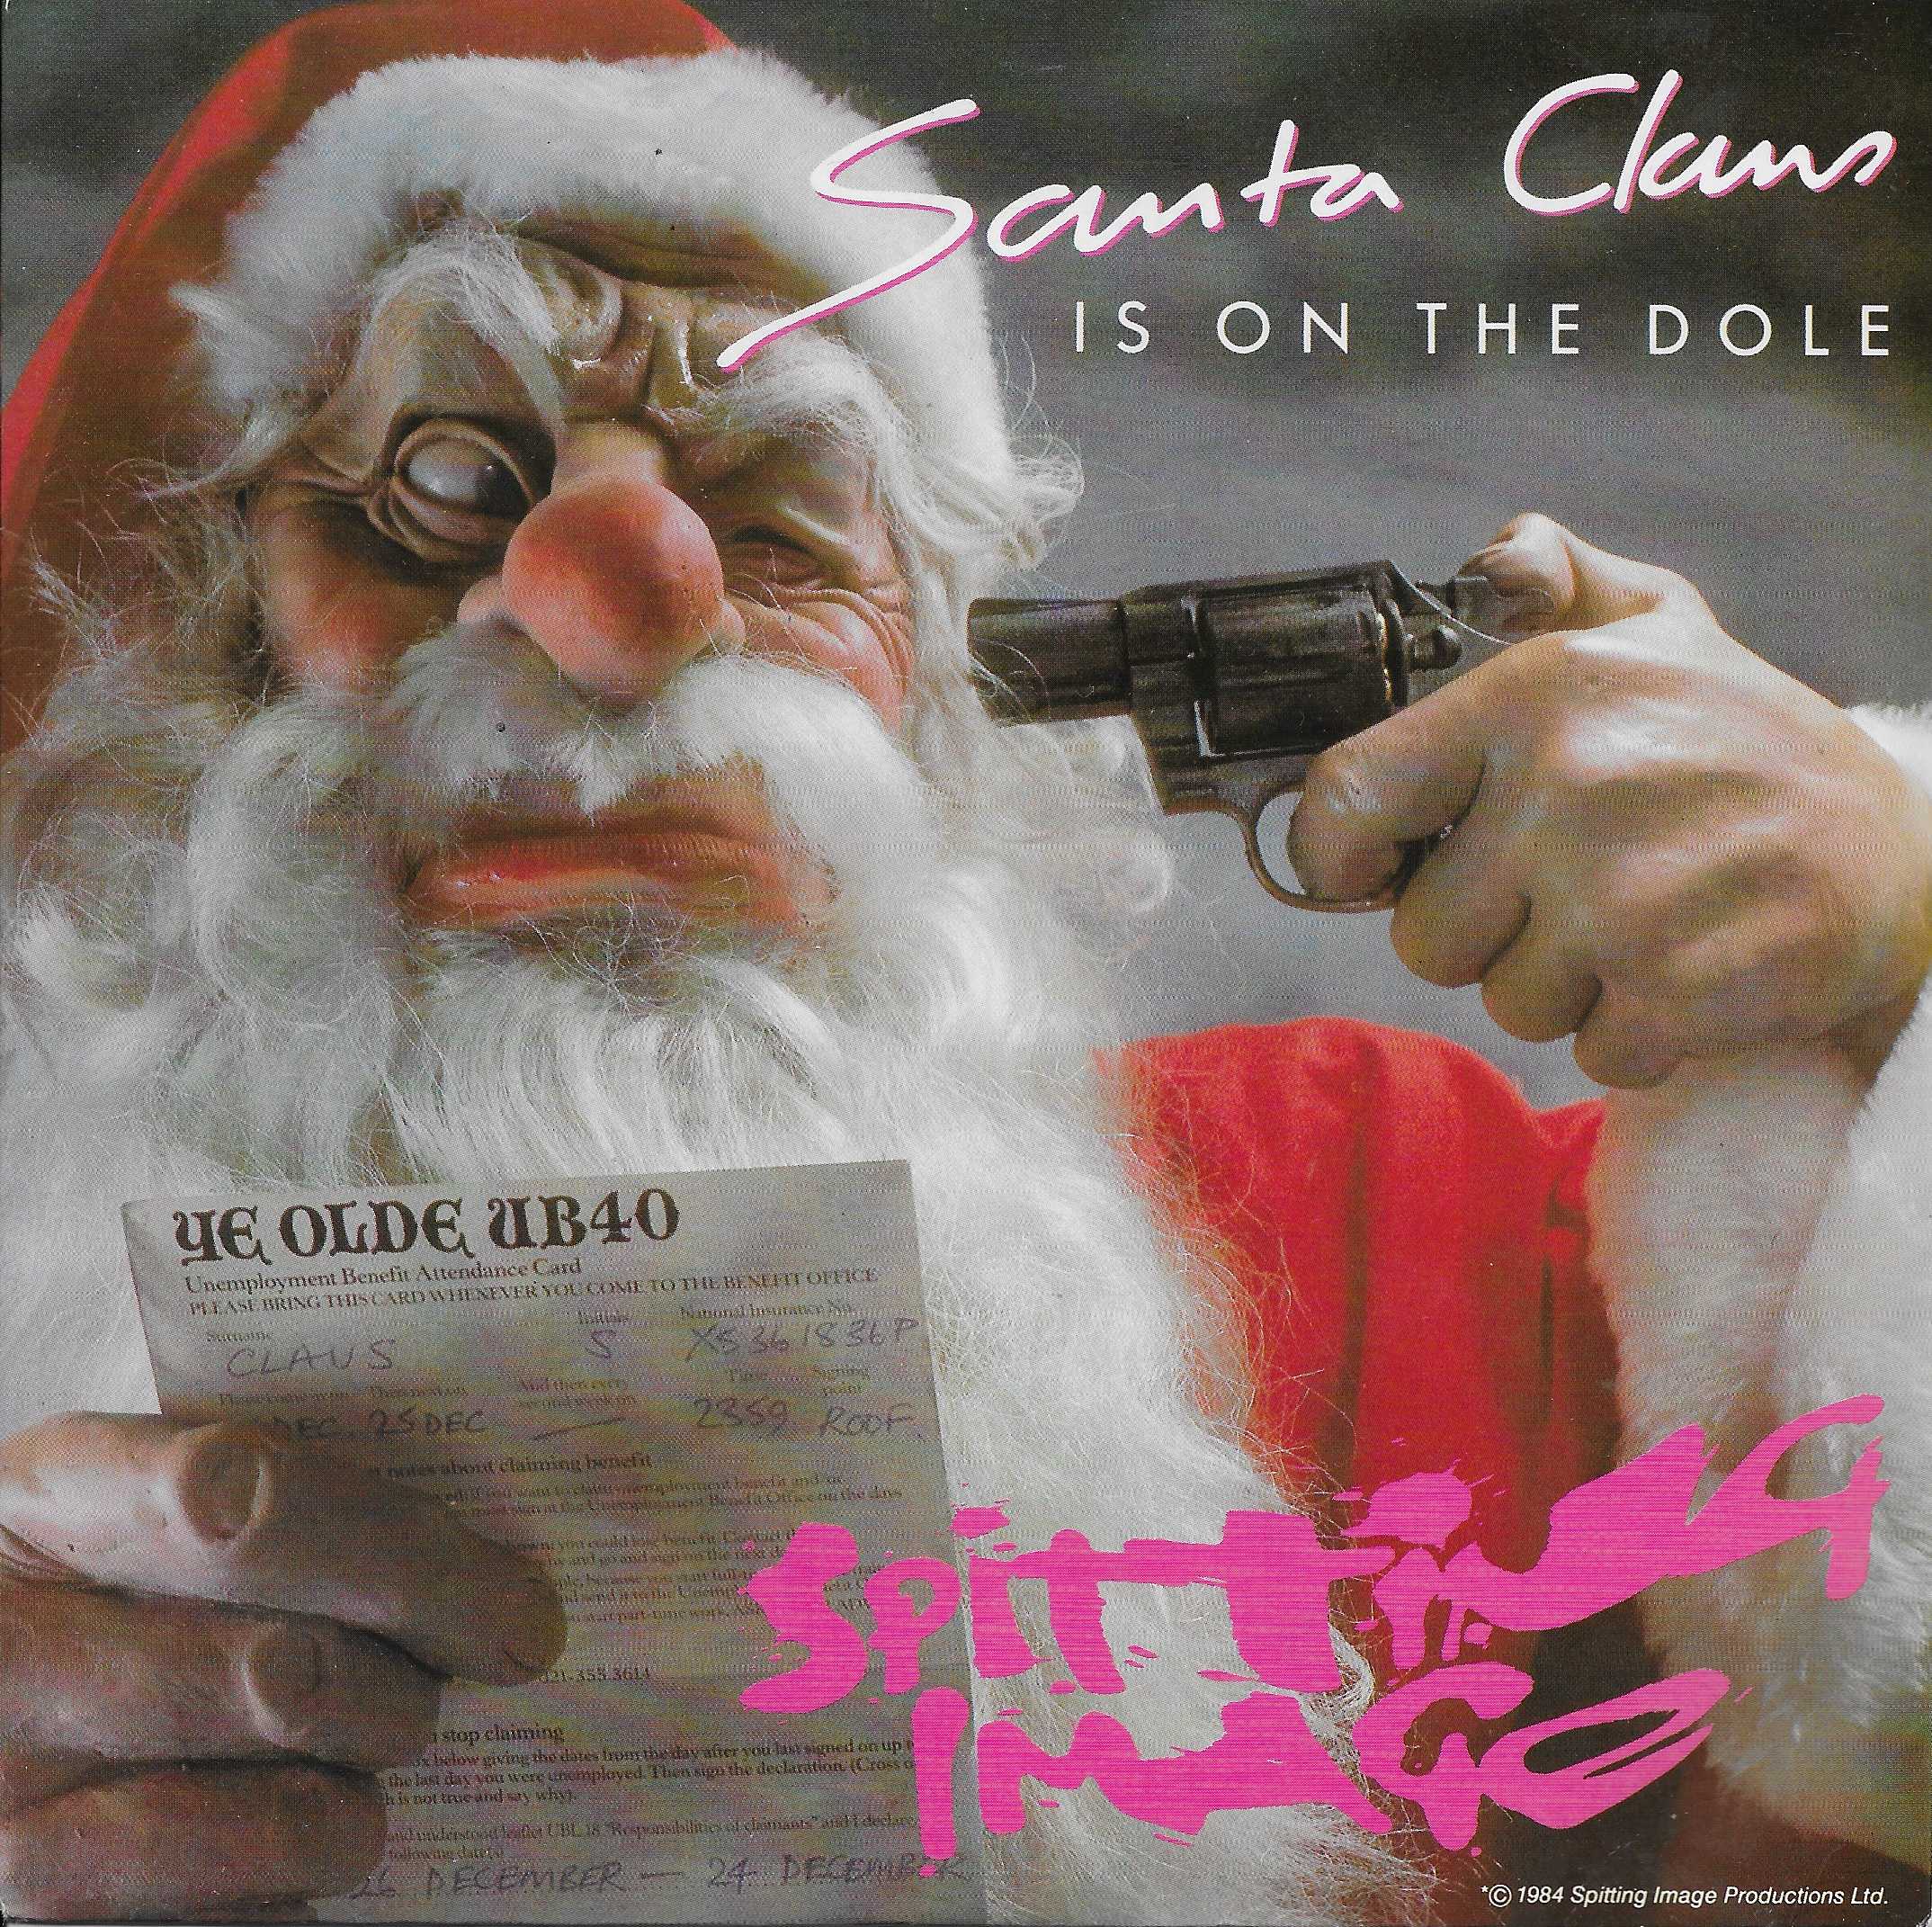 Picture of Santa Claus is on the dole (Spitting Image) by artist Pope / Grant / Naylor from ITV, Channel 4 and Channel 5 singles library